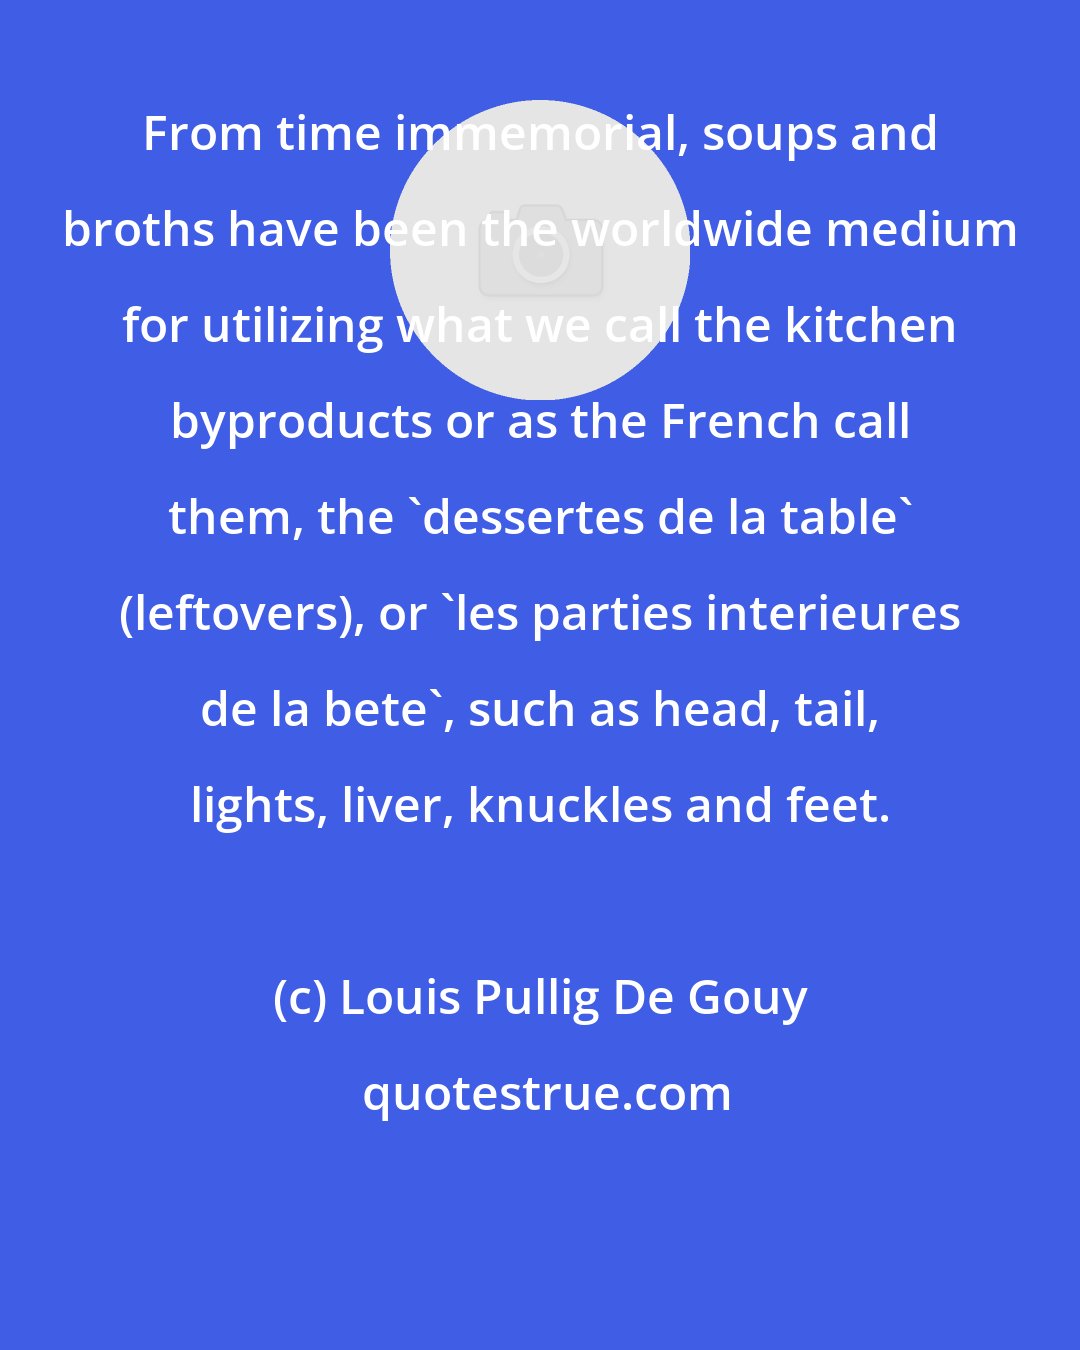 Louis Pullig De Gouy: From time immemorial, soups and broths have been the worldwide medium for utilizing what we call the kitchen byproducts or as the French call them, the 'dessertes de la table' (leftovers), or 'les parties interieures de la bete', such as head, tail, lights, liver, knuckles and feet.